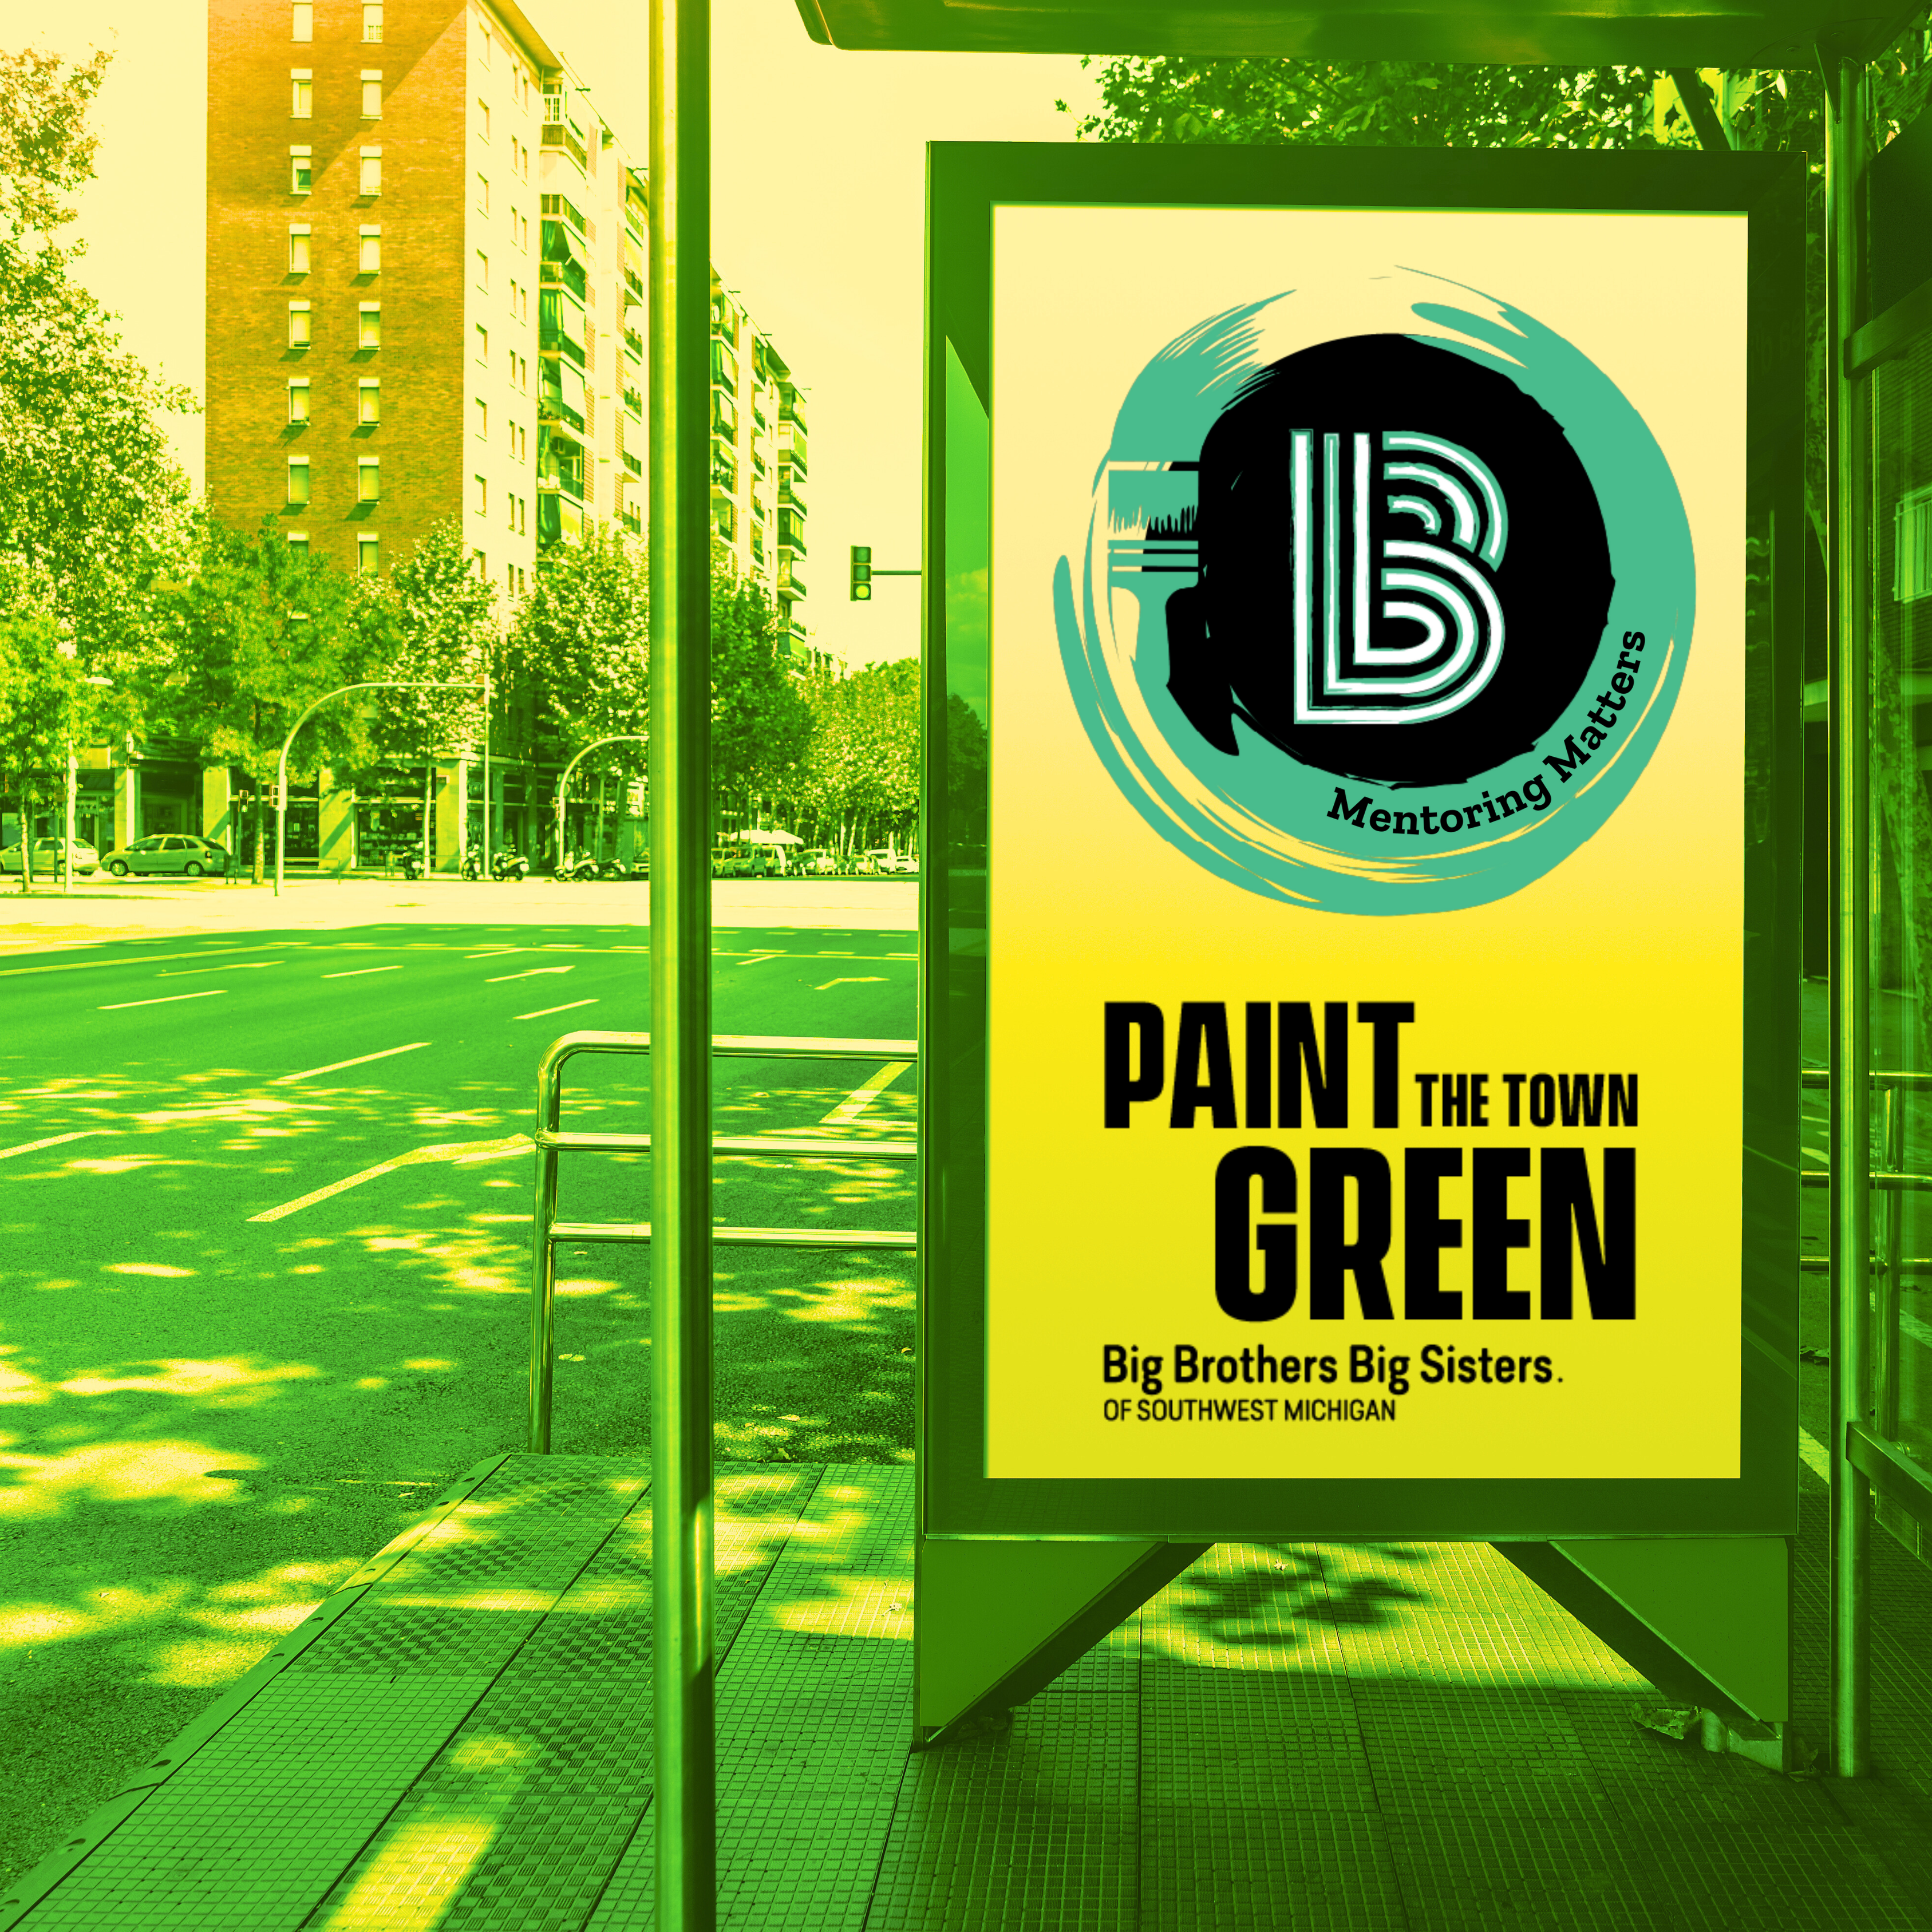 A photo of the Paint The Town Green logo at a bus stop